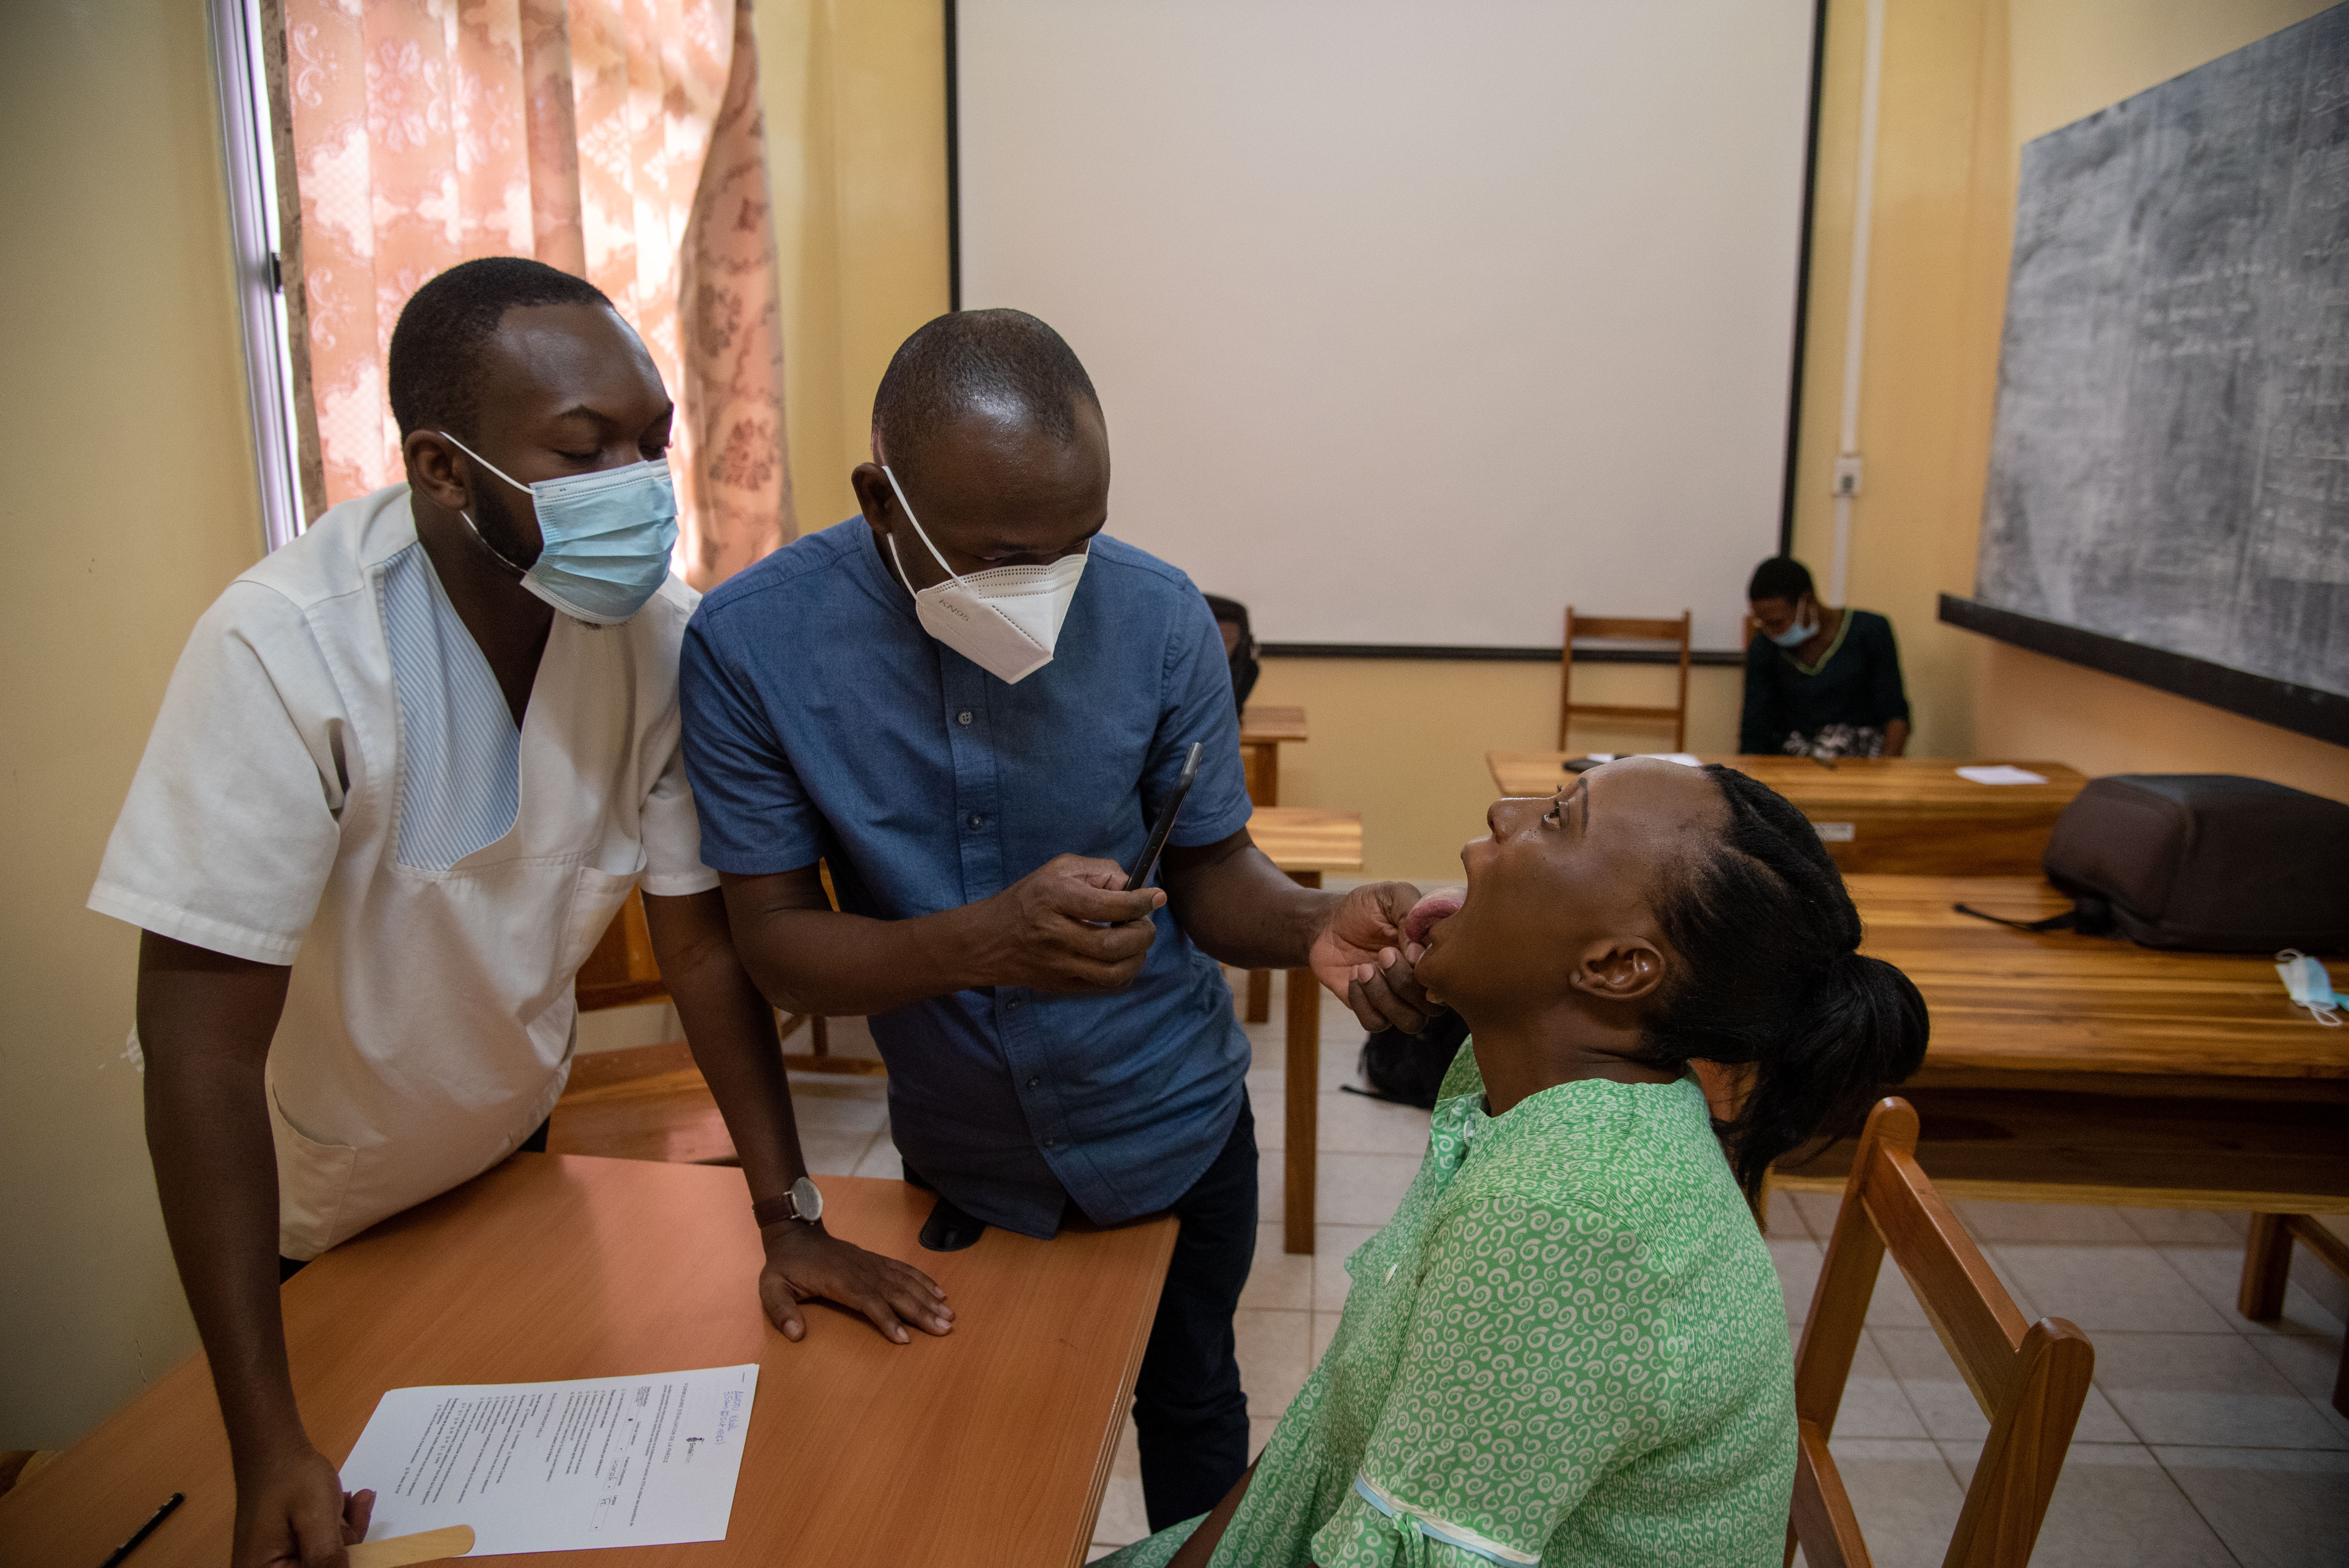 Edouardo taking a picture of the inside of an older patient’s mouth with her tongue sticking out. Faysal stands beside him. Both are wearing masks